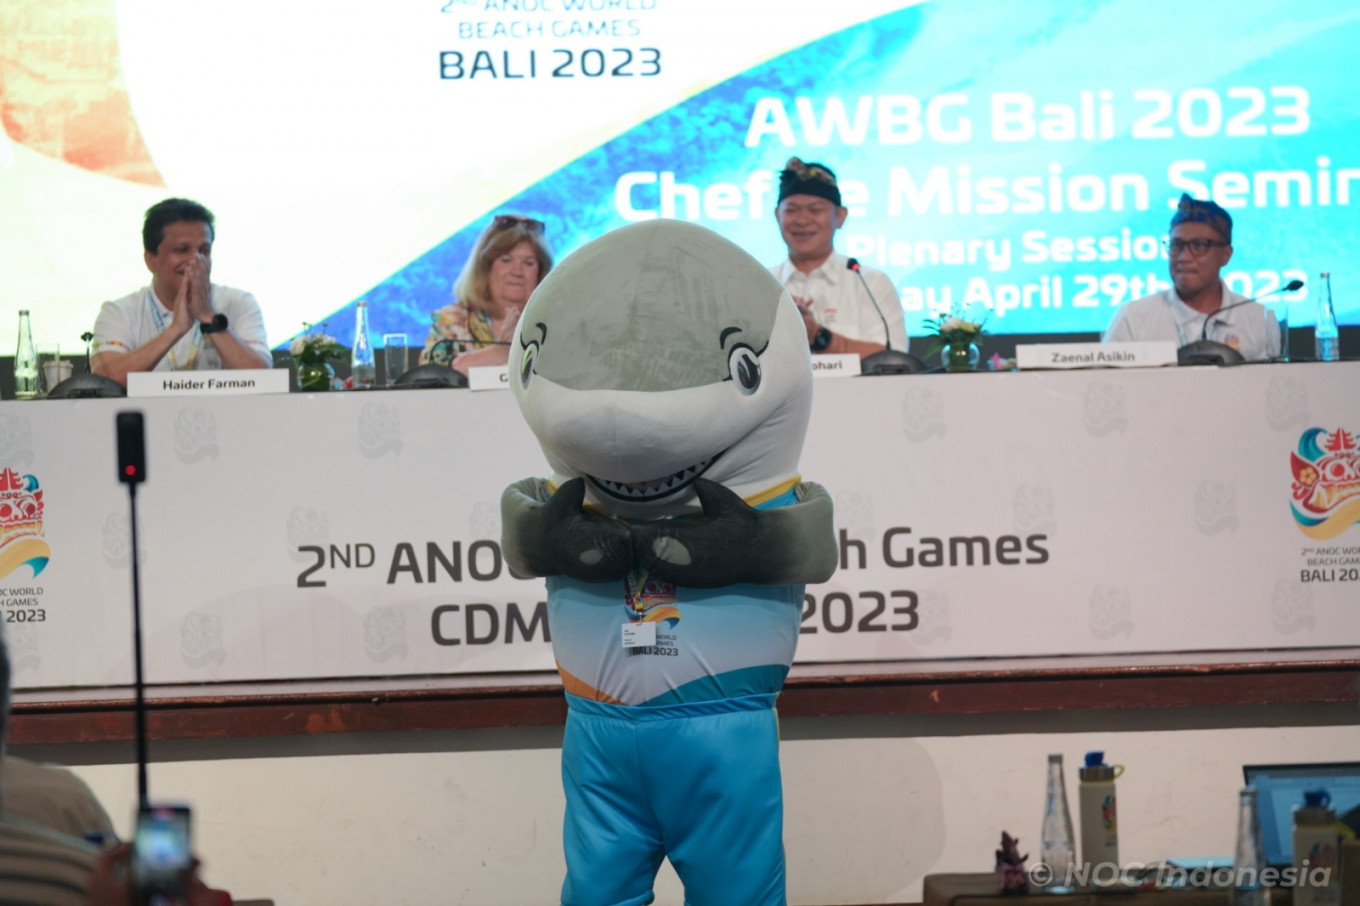 The announcement of the mascots for the 2023 ANOC World Beach Games in Bali was among the highlights of the Chef de Missions seminar ©Twitter 